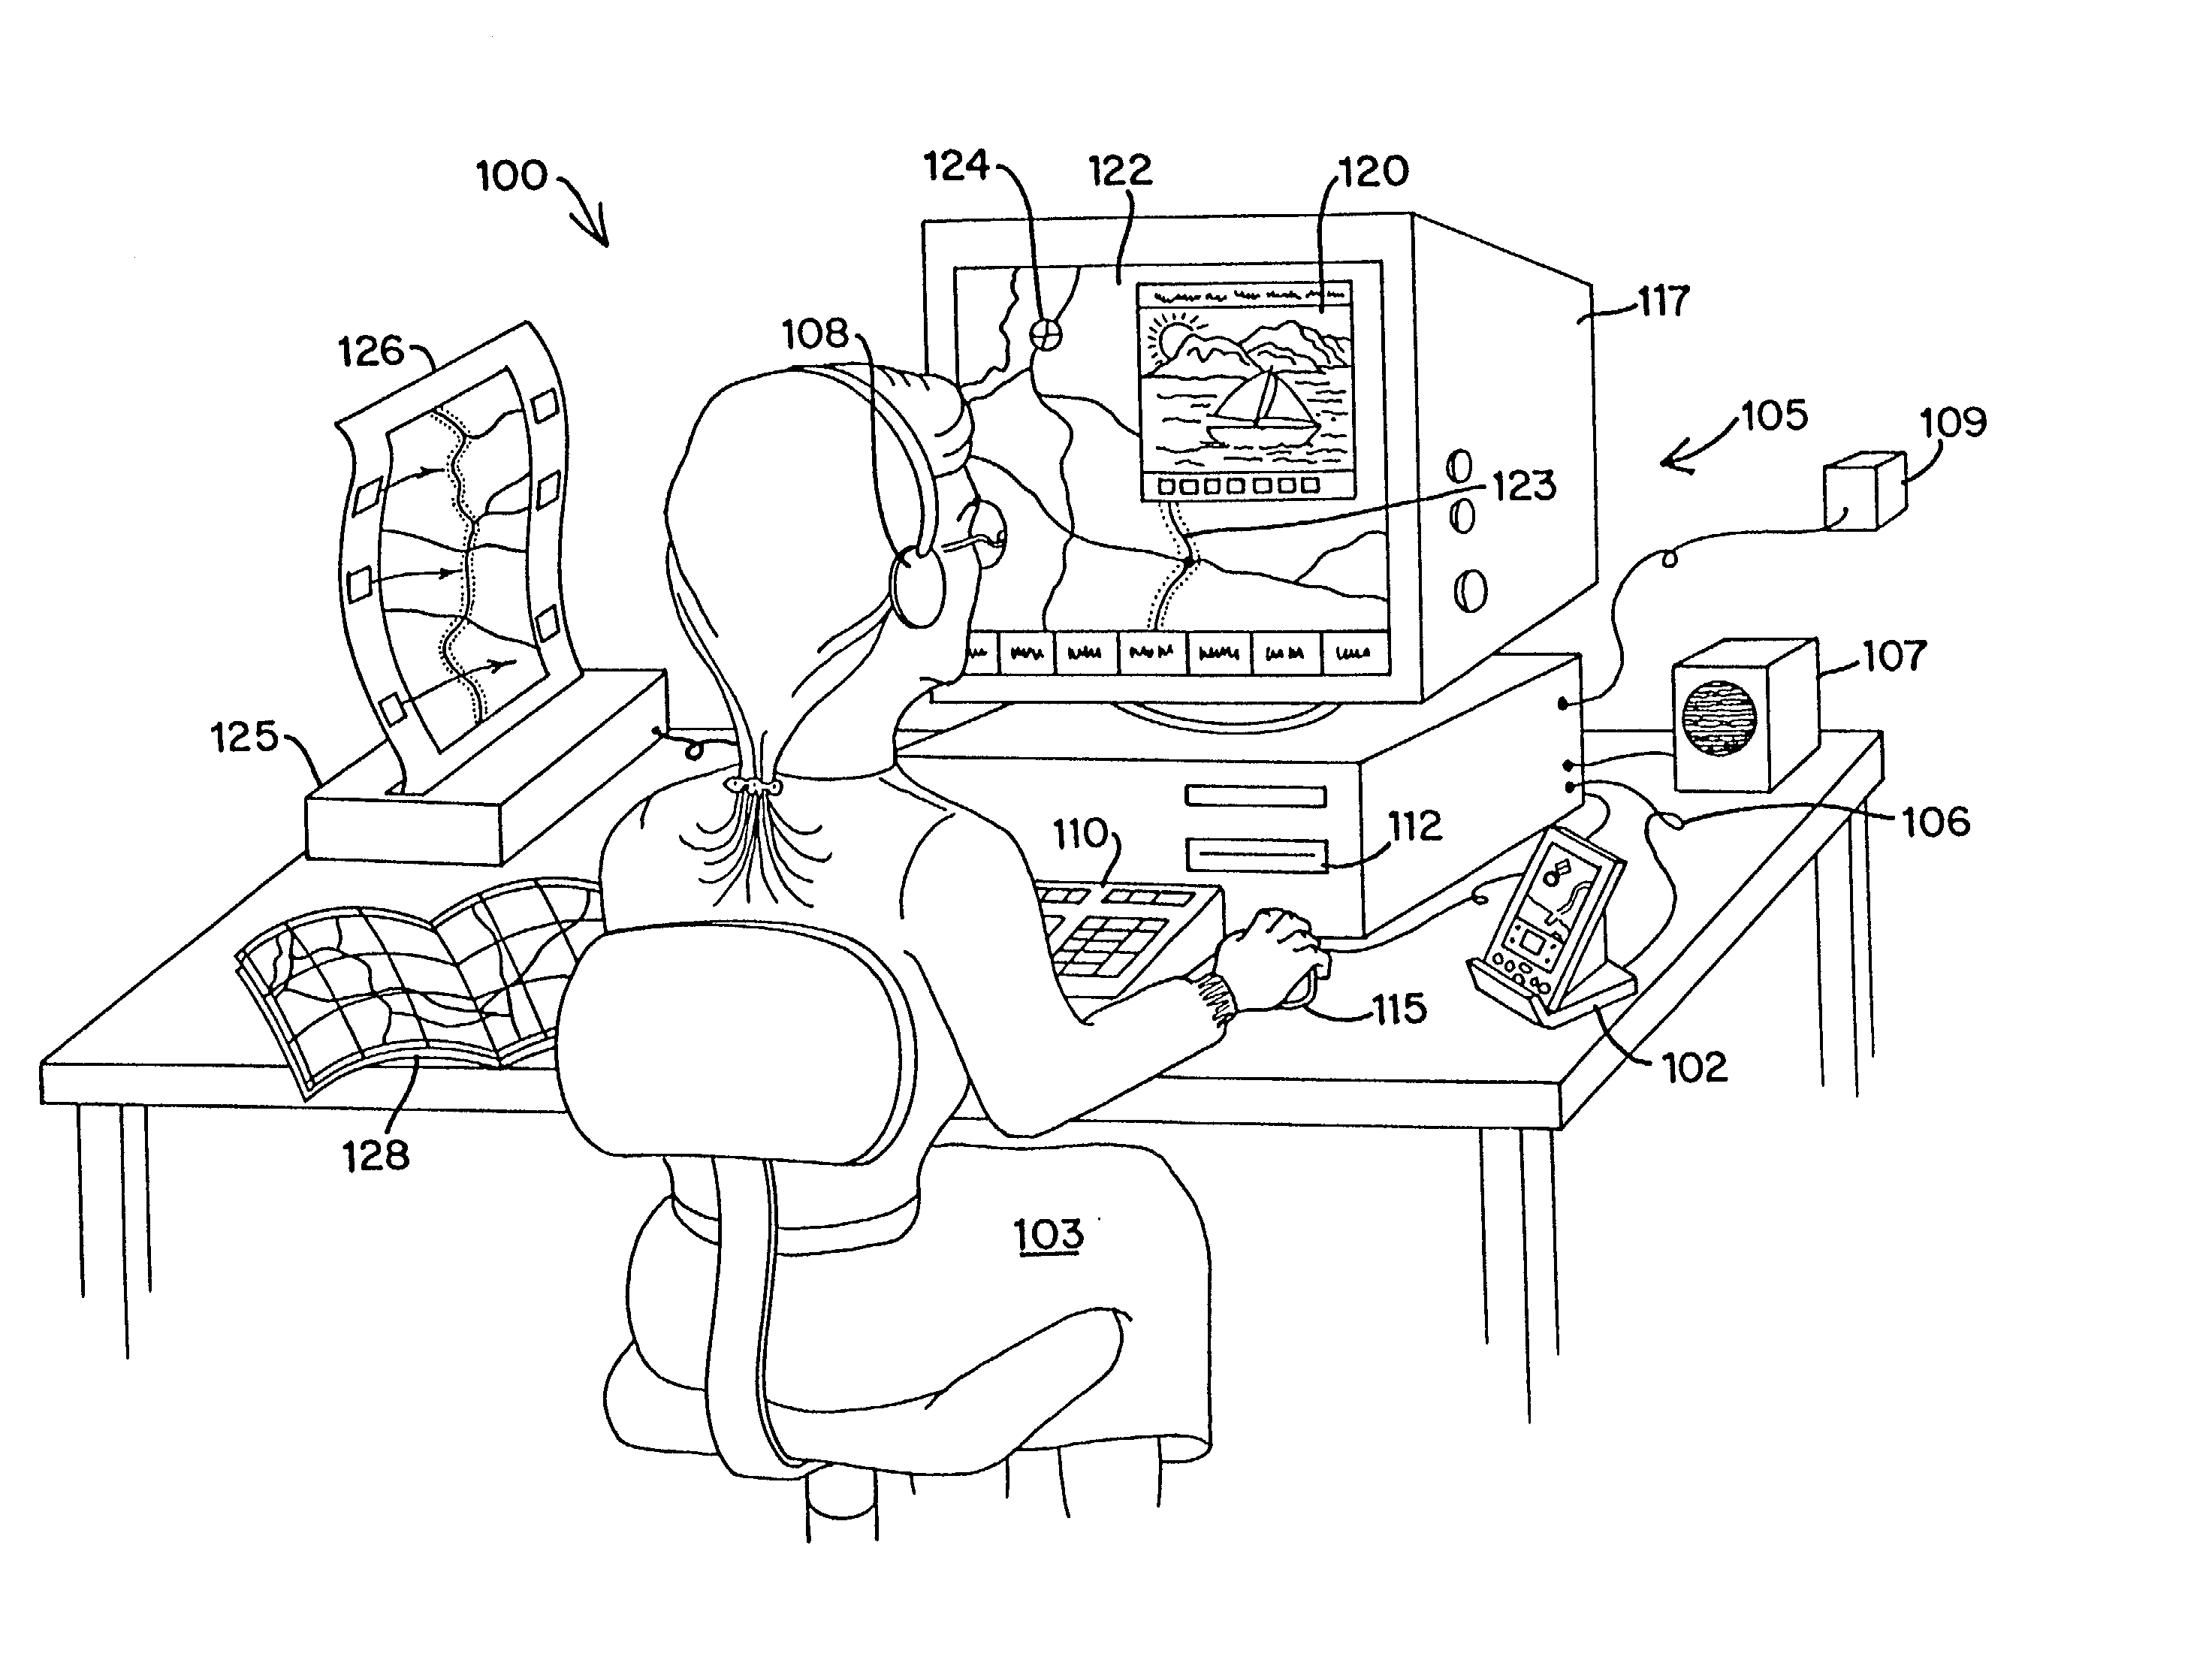 Integrated routing/mapping information system